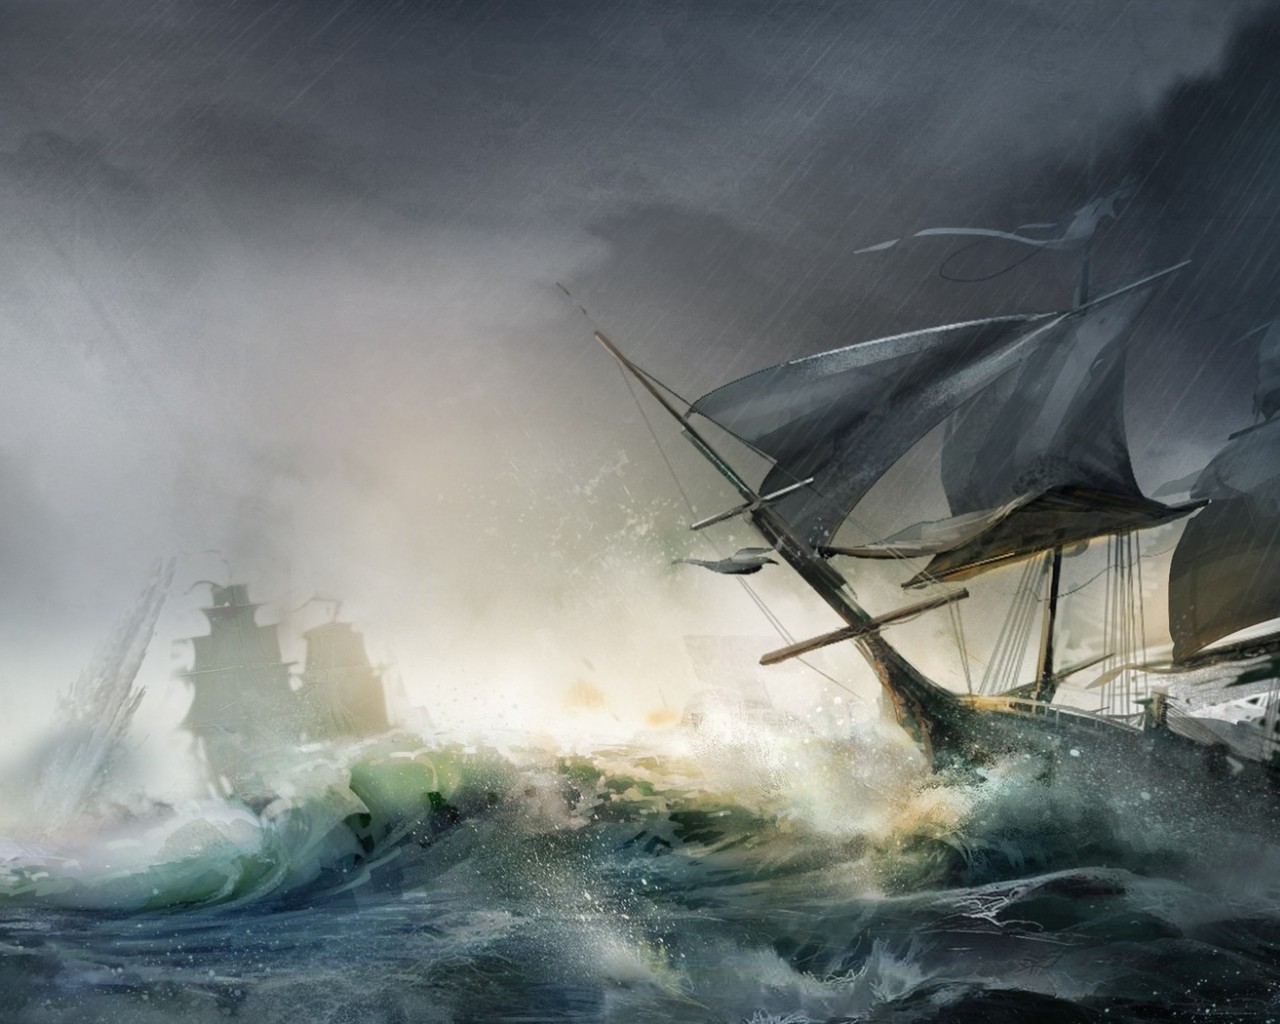 ship in the stormy sea